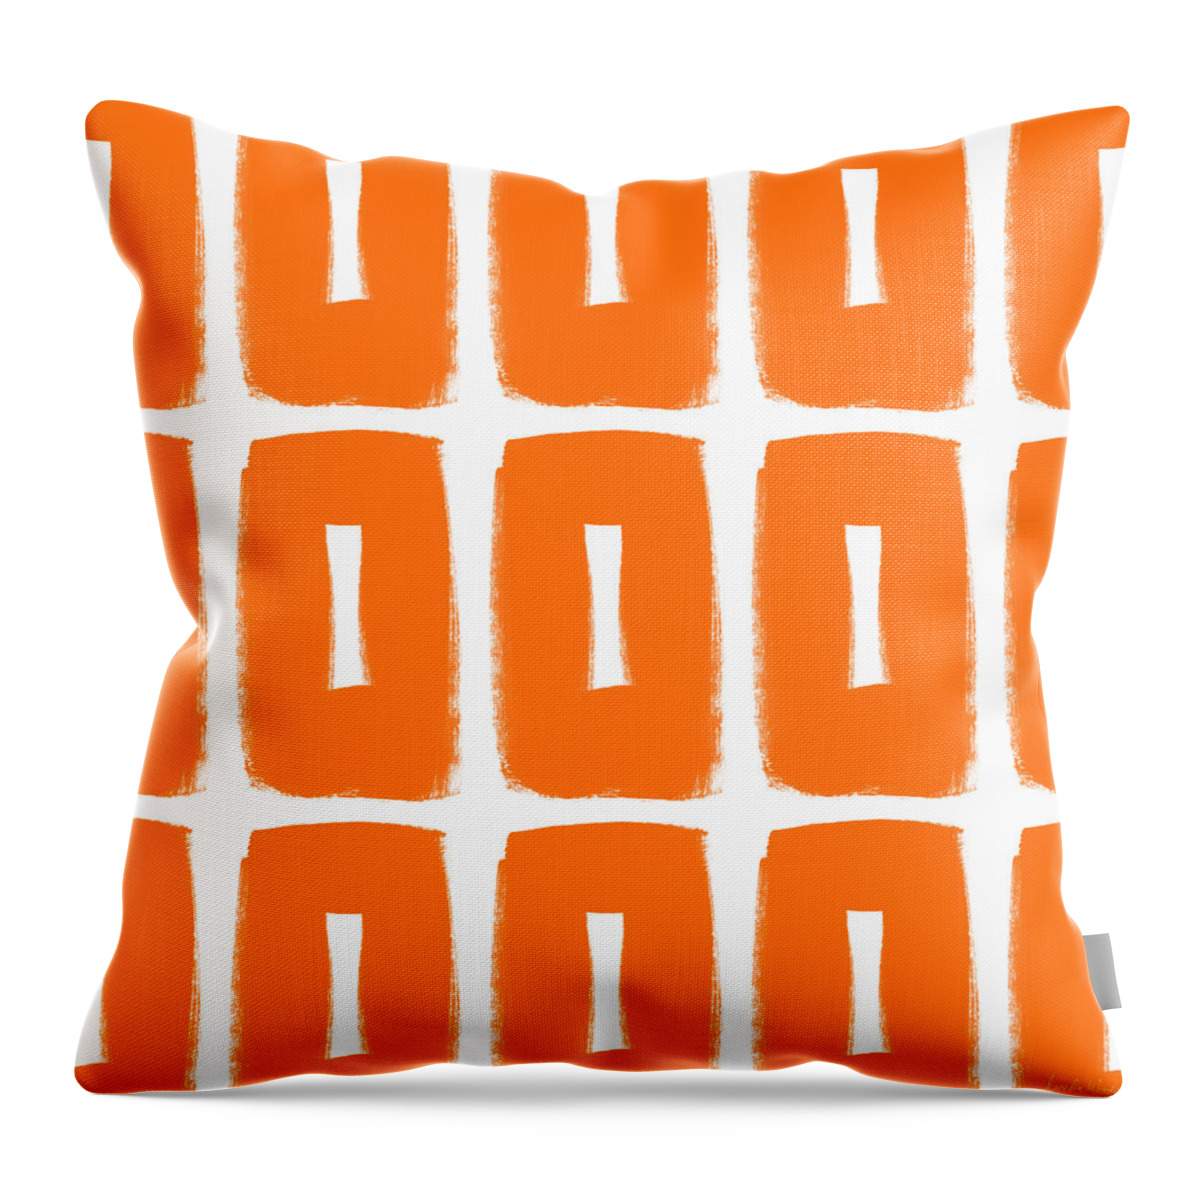 Orange Throw Pillow featuring the mixed media Orange Boxes- Art by Linda Woods by Linda Woods